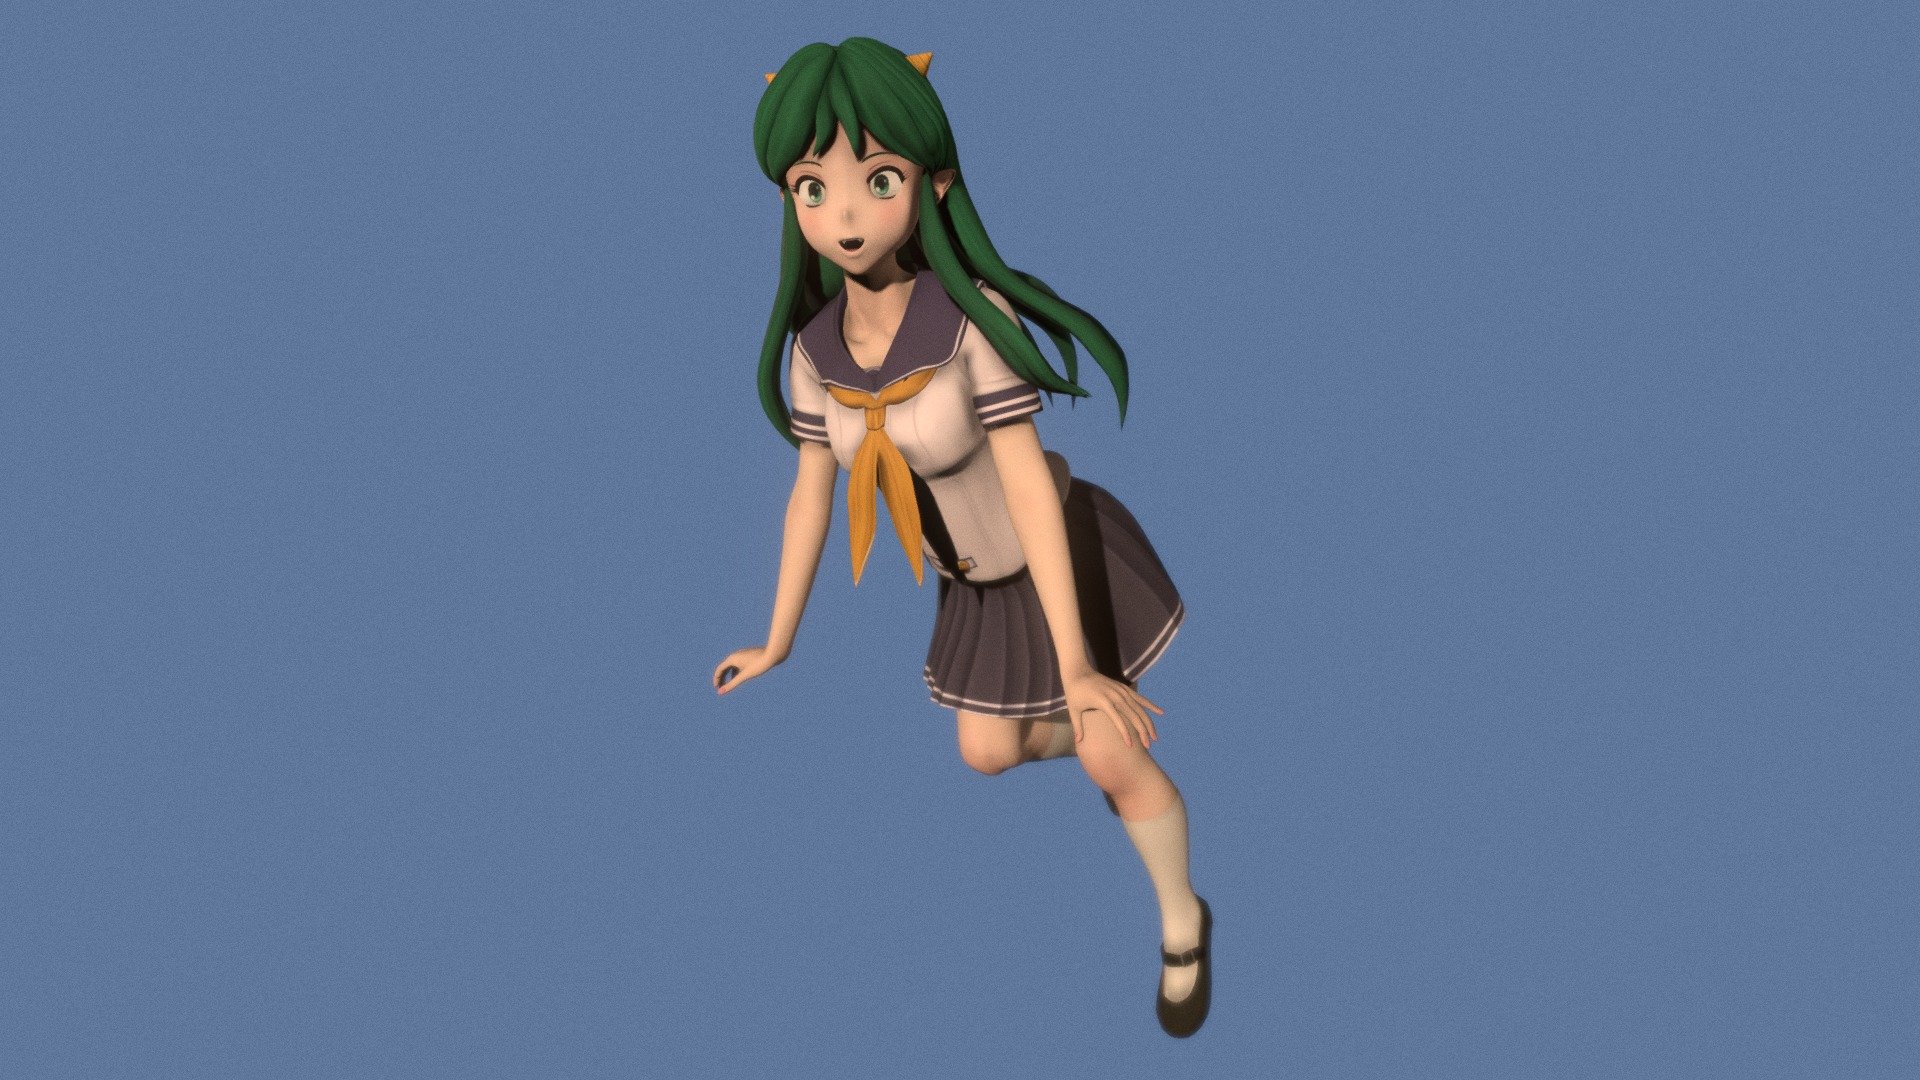 Posed model of anime girl Lum (Urusei Yatsura).

This product include .FBX (ver. 7200) and .MAX (ver. 2010) files.

Rigged version: https://sketchfab.com/3d-models/t-pose-rigged-model-of-lum-2c12ee01bd234fdf940aa0b8649c7d73

I support convert this 3D model to various file formats: 3DS; AI; ASE; DAE; DWF; DWG; DXF; FLT; HTR; IGS; M3G; MQO; OBJ; SAT; STL; W3D; WRL; X.

You can buy all of my models in one pack to save cost: https://sketchfab.com/3d-models/all-of-my-anime-girls-c5a56156994e4193b9e8fa21a3b8360b

And I can make commission models.

If you have any questions, please leave a comment or contact me via my email 3d.eden.project@gmail.com 3d model